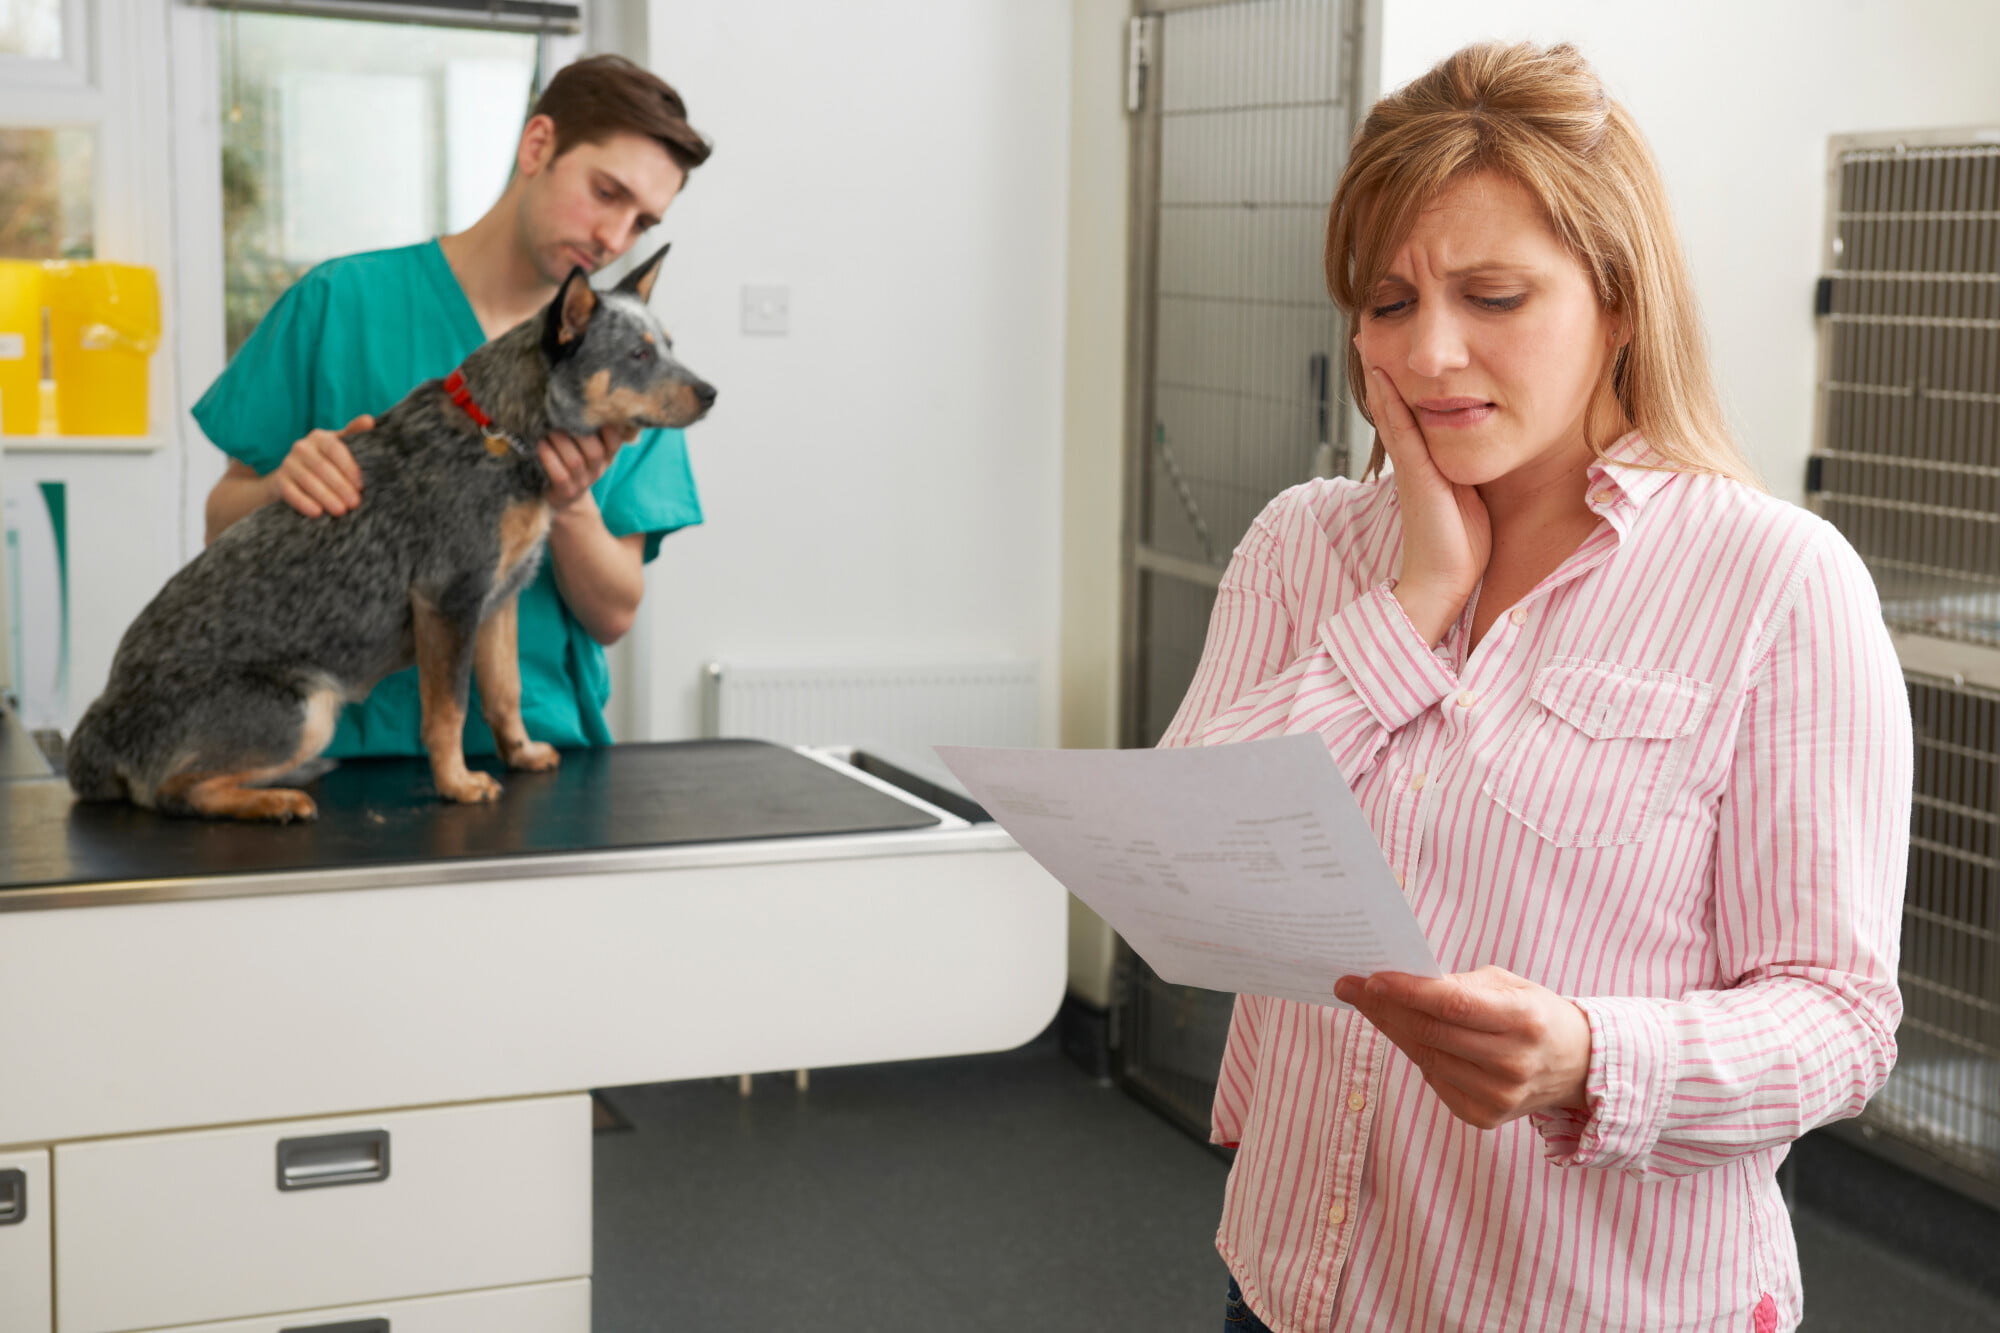 Finding the right insurance policy as a pet owner requires knowing your options. Here is everything you need to know about how to pick pet insurance.